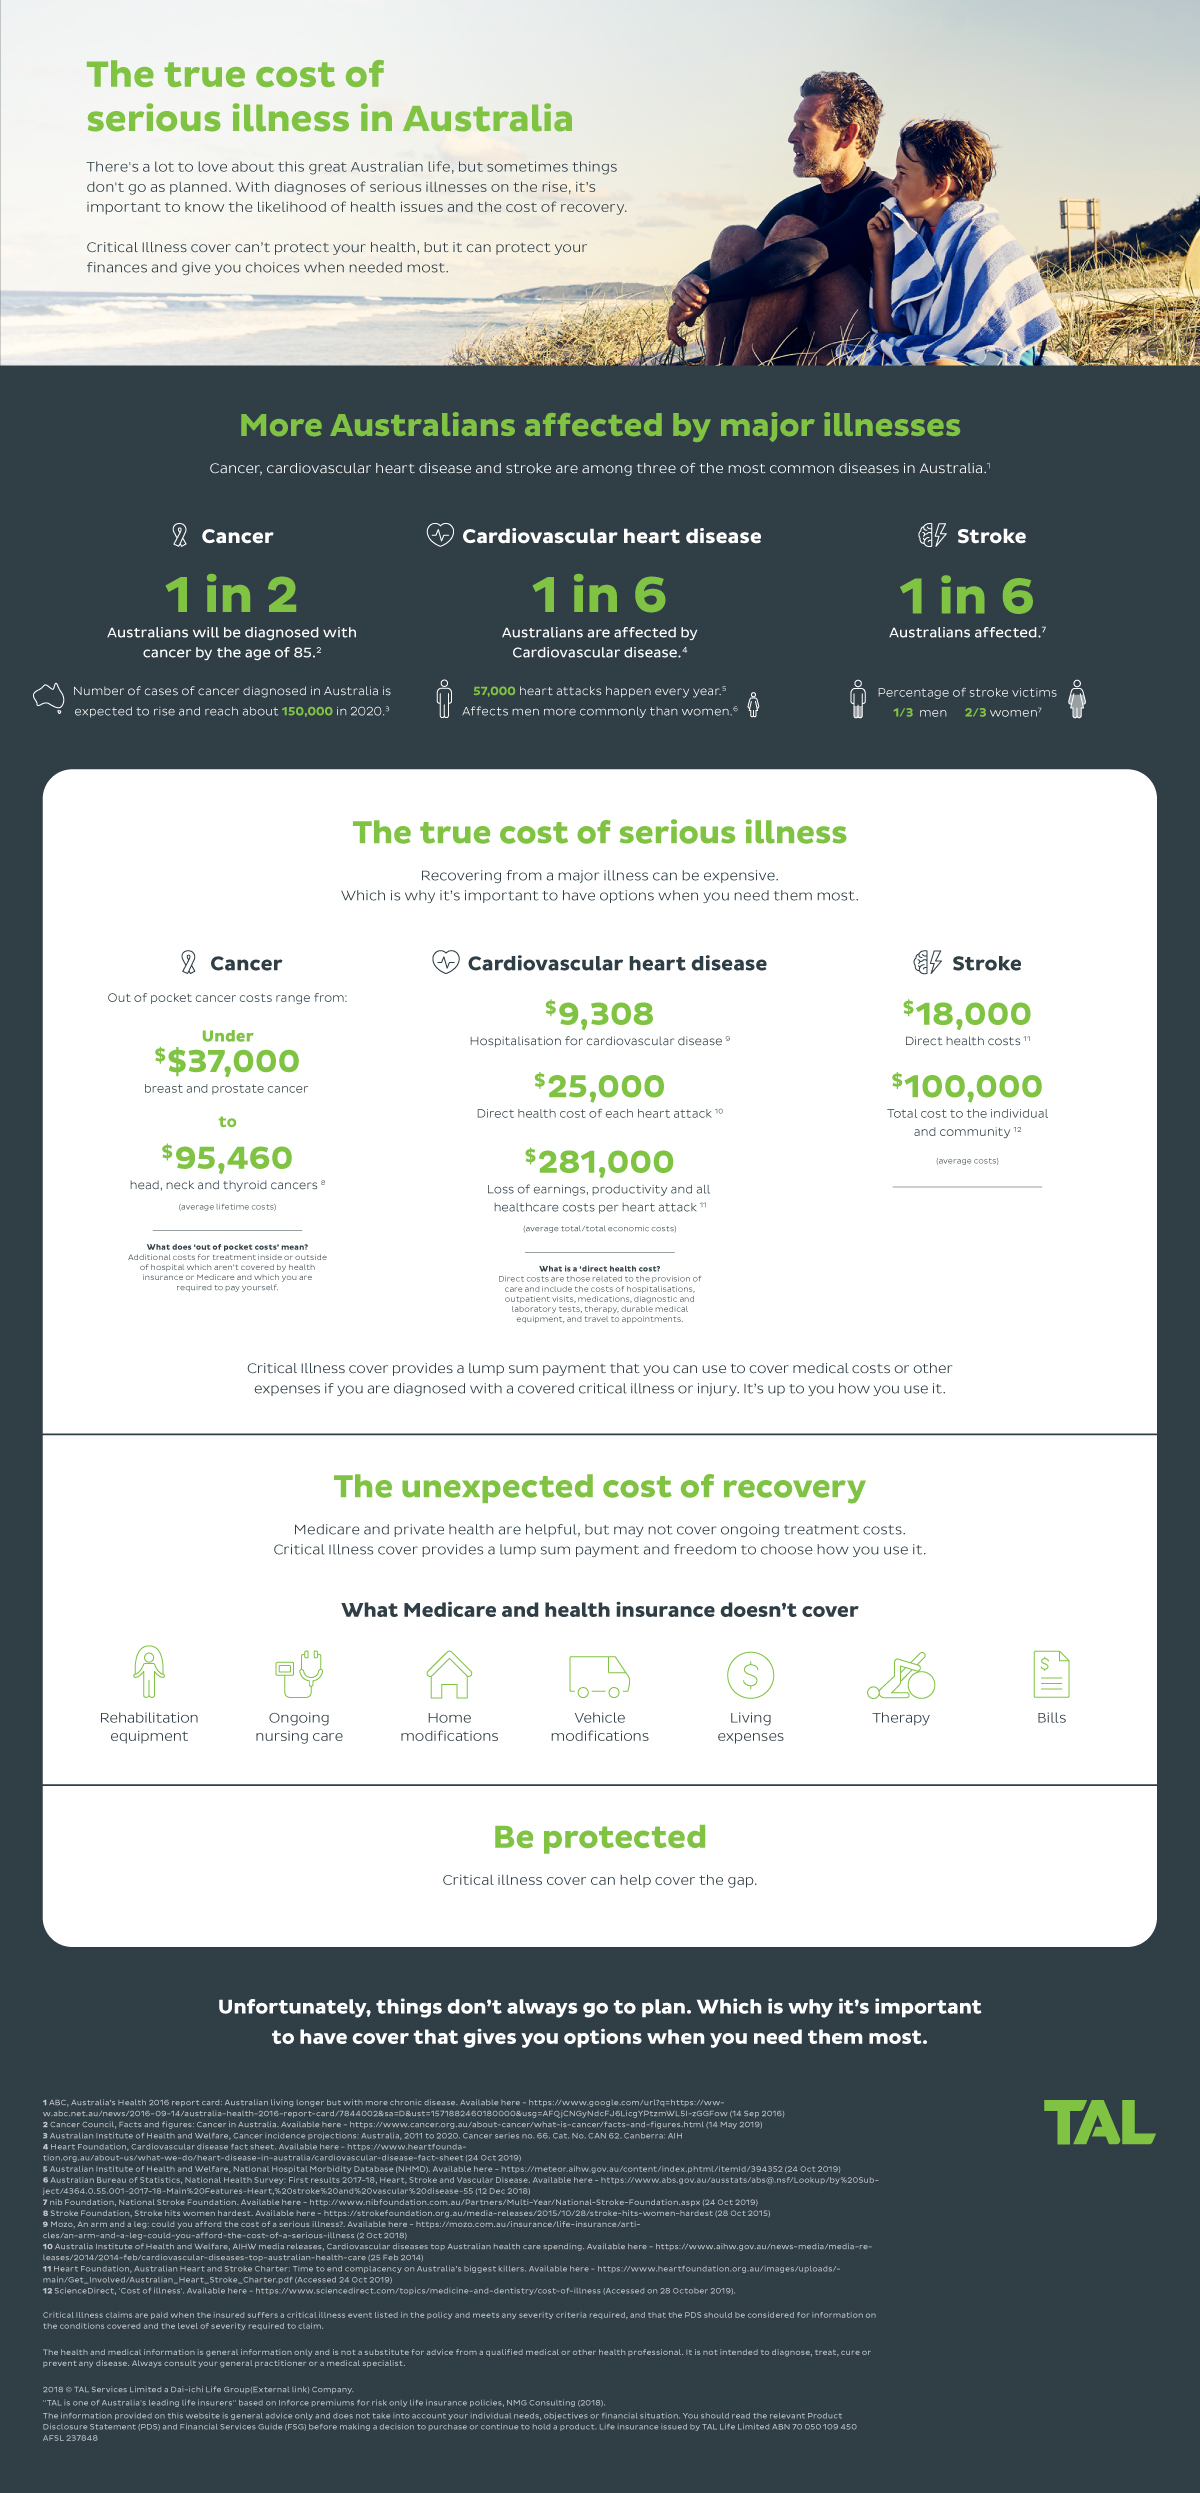 Critical illness infographic outlining the true cost of serious illness